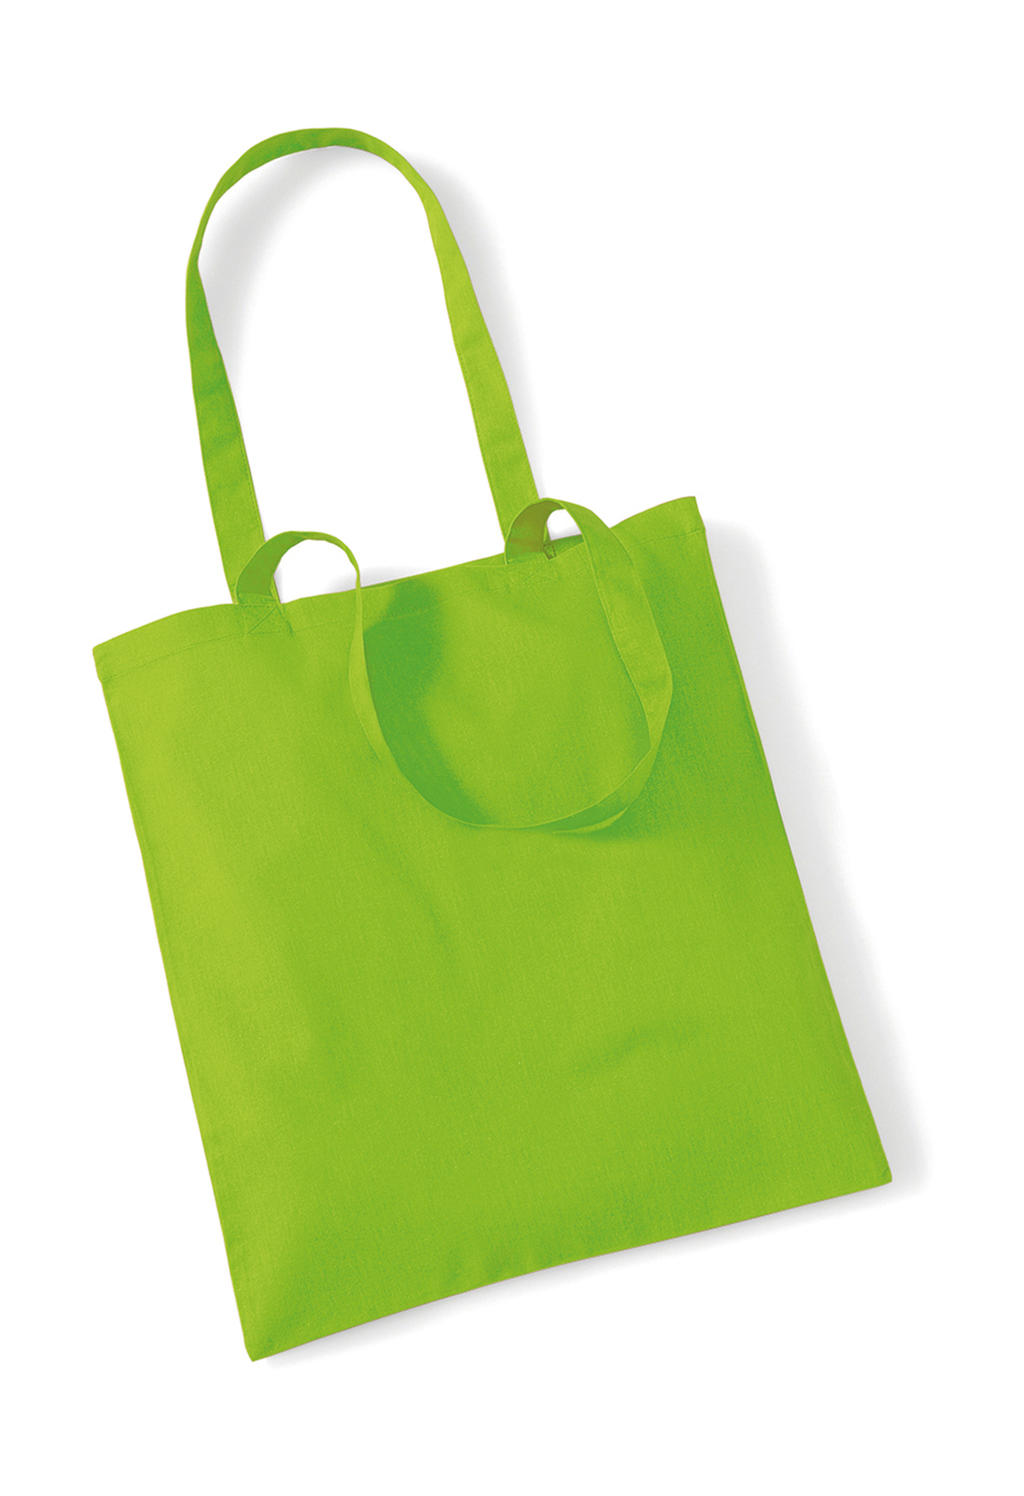  Bag for Life - Long Handles in Farbe Lime Green